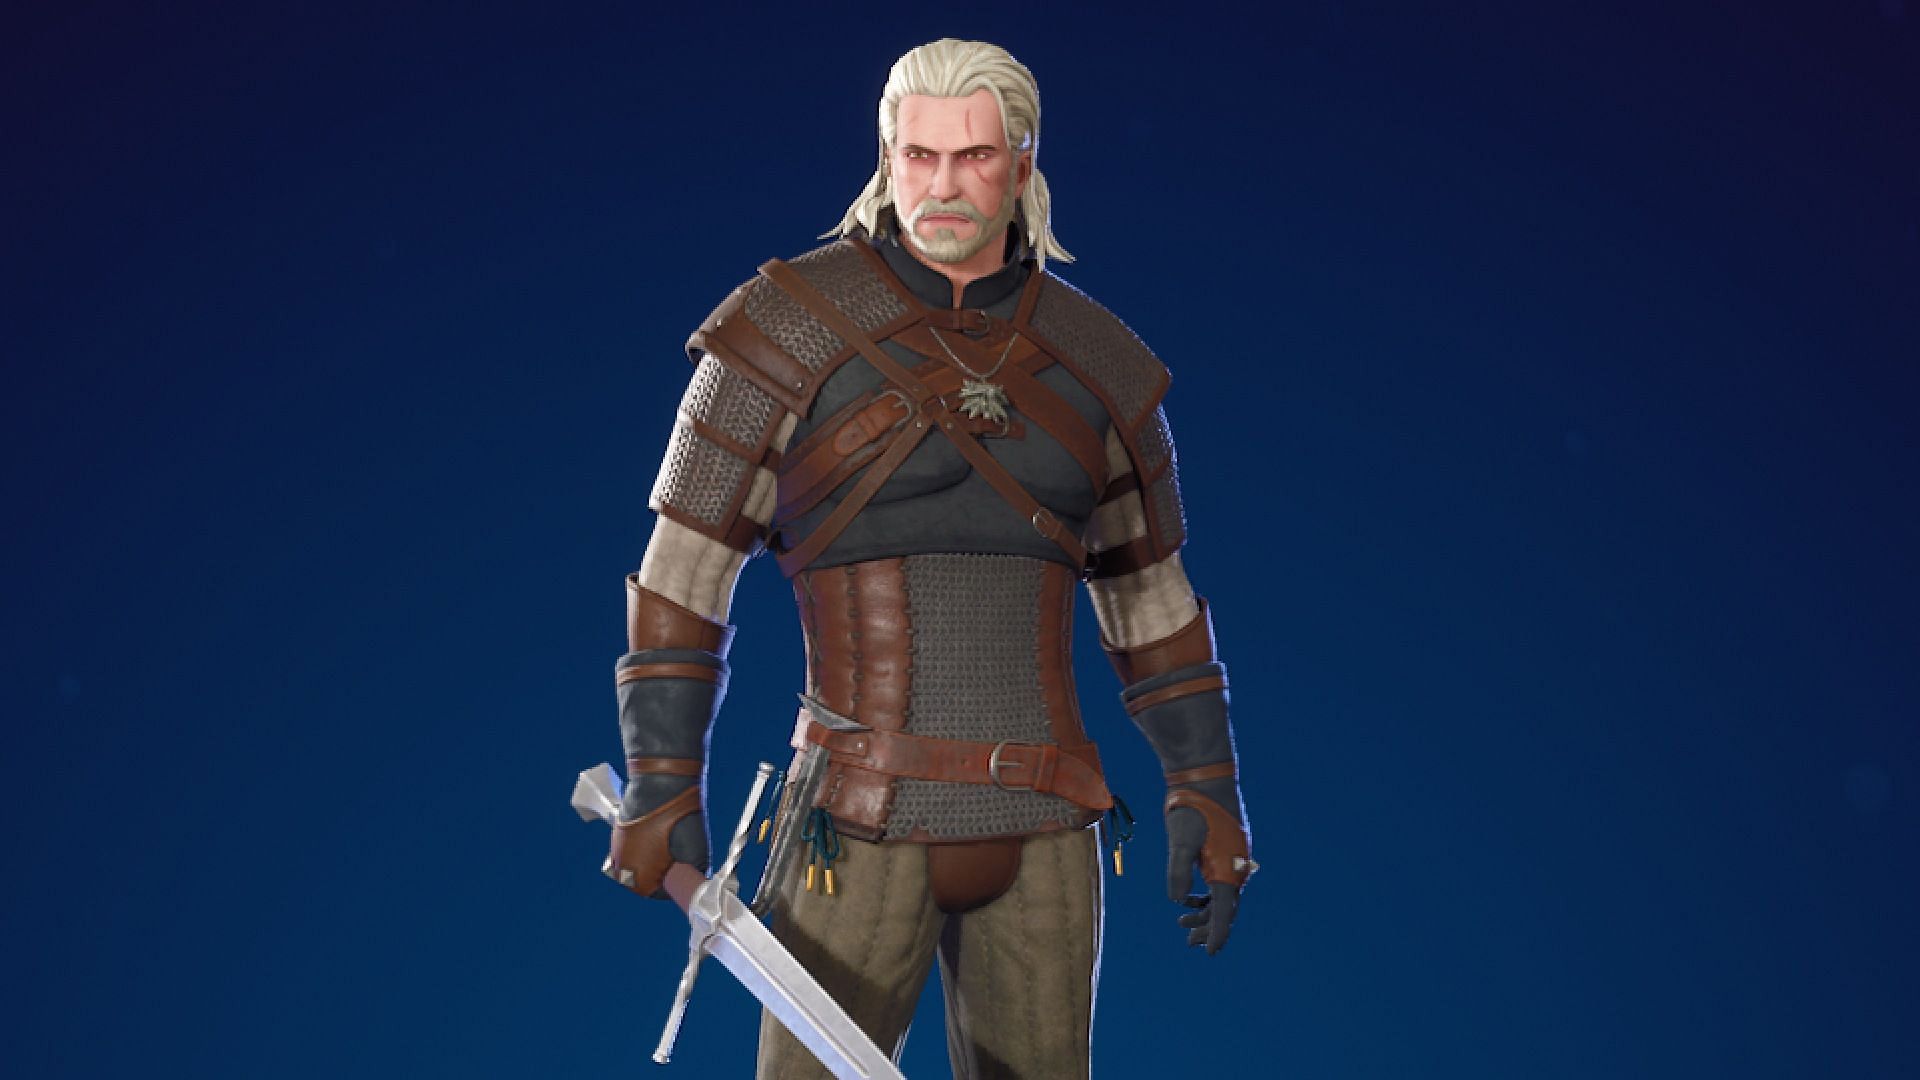 The Witcher is the most popular character in the Chapter 4 Season 1 Battle Pass (Image via Epic Games)